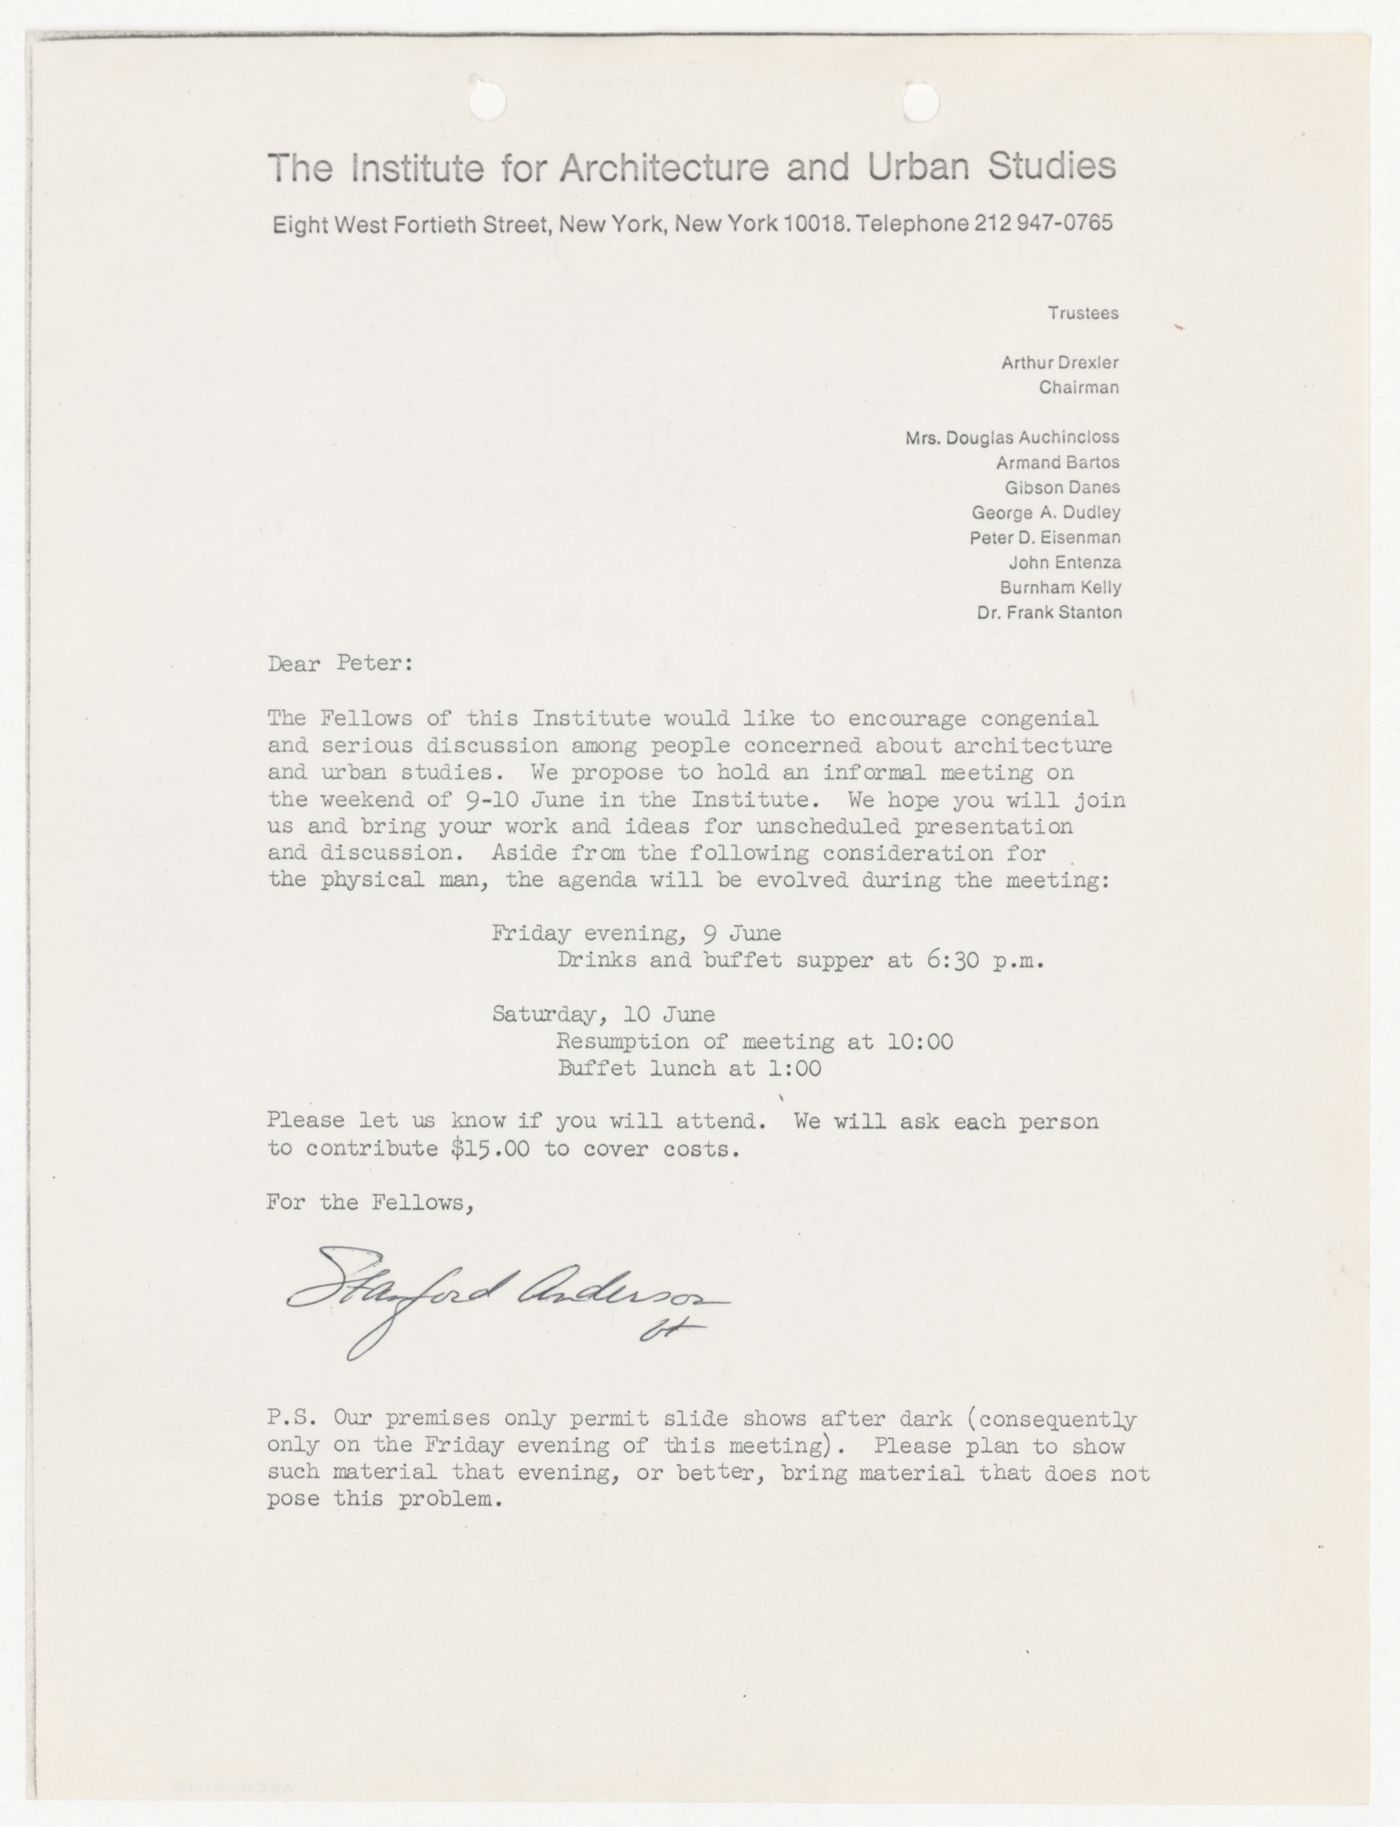 Memorandum from Stanford Anderson to Peter D. Eisenman about an informal meeting of the Fellows